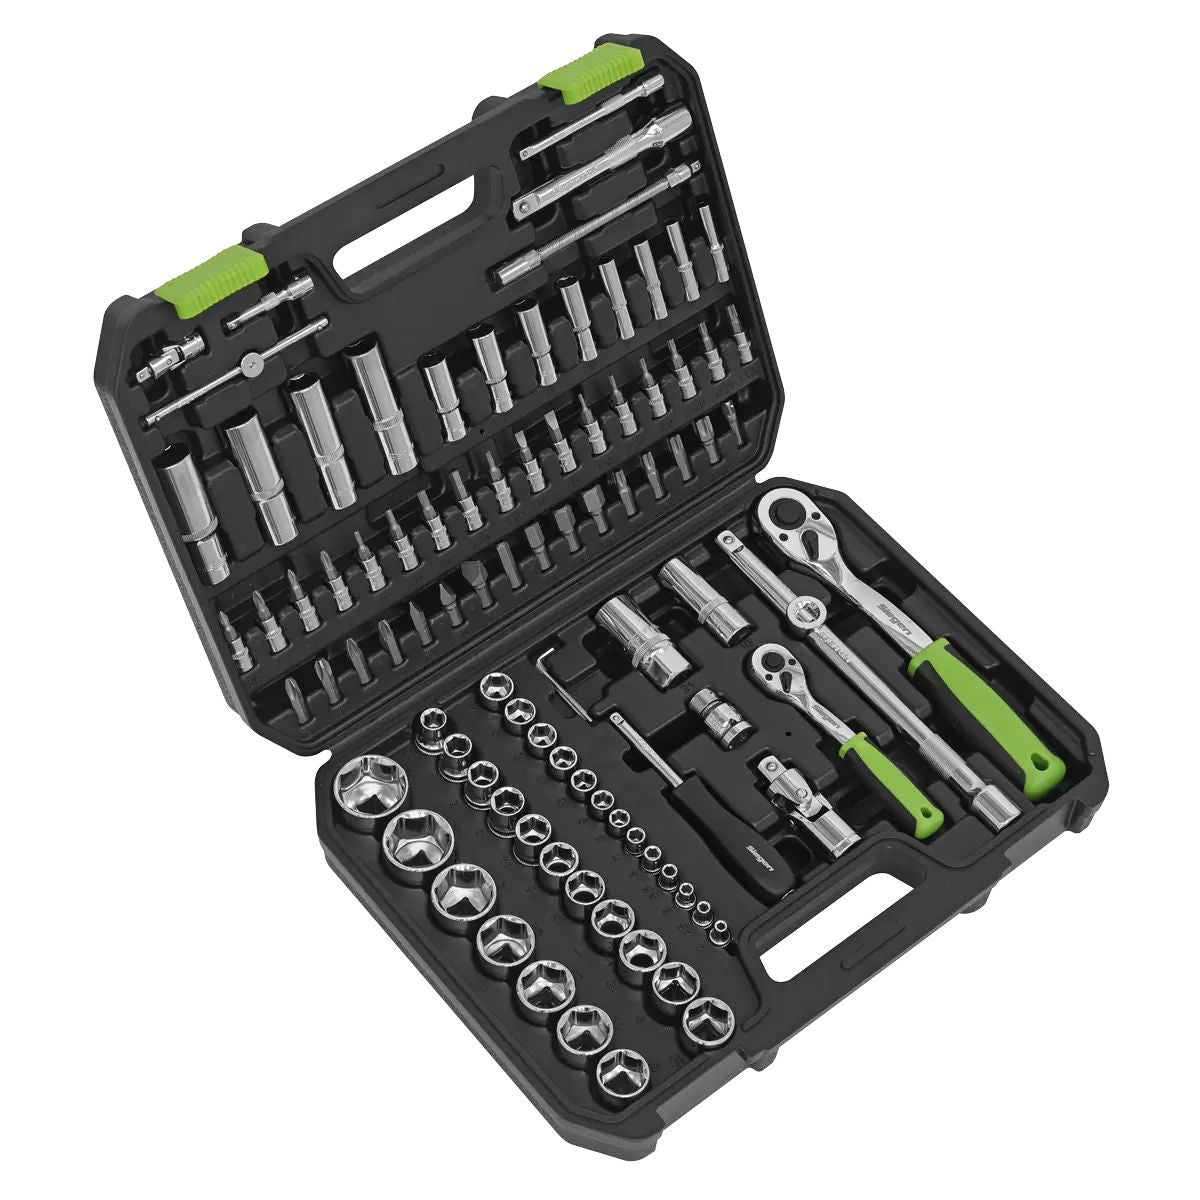 Sealey AP2200COMBOHV 6 Drawer Topchest & Rollcab Combination with Ball-Bearing Slides - Hi-Vis Green/Grey & 170pc Tool Kit